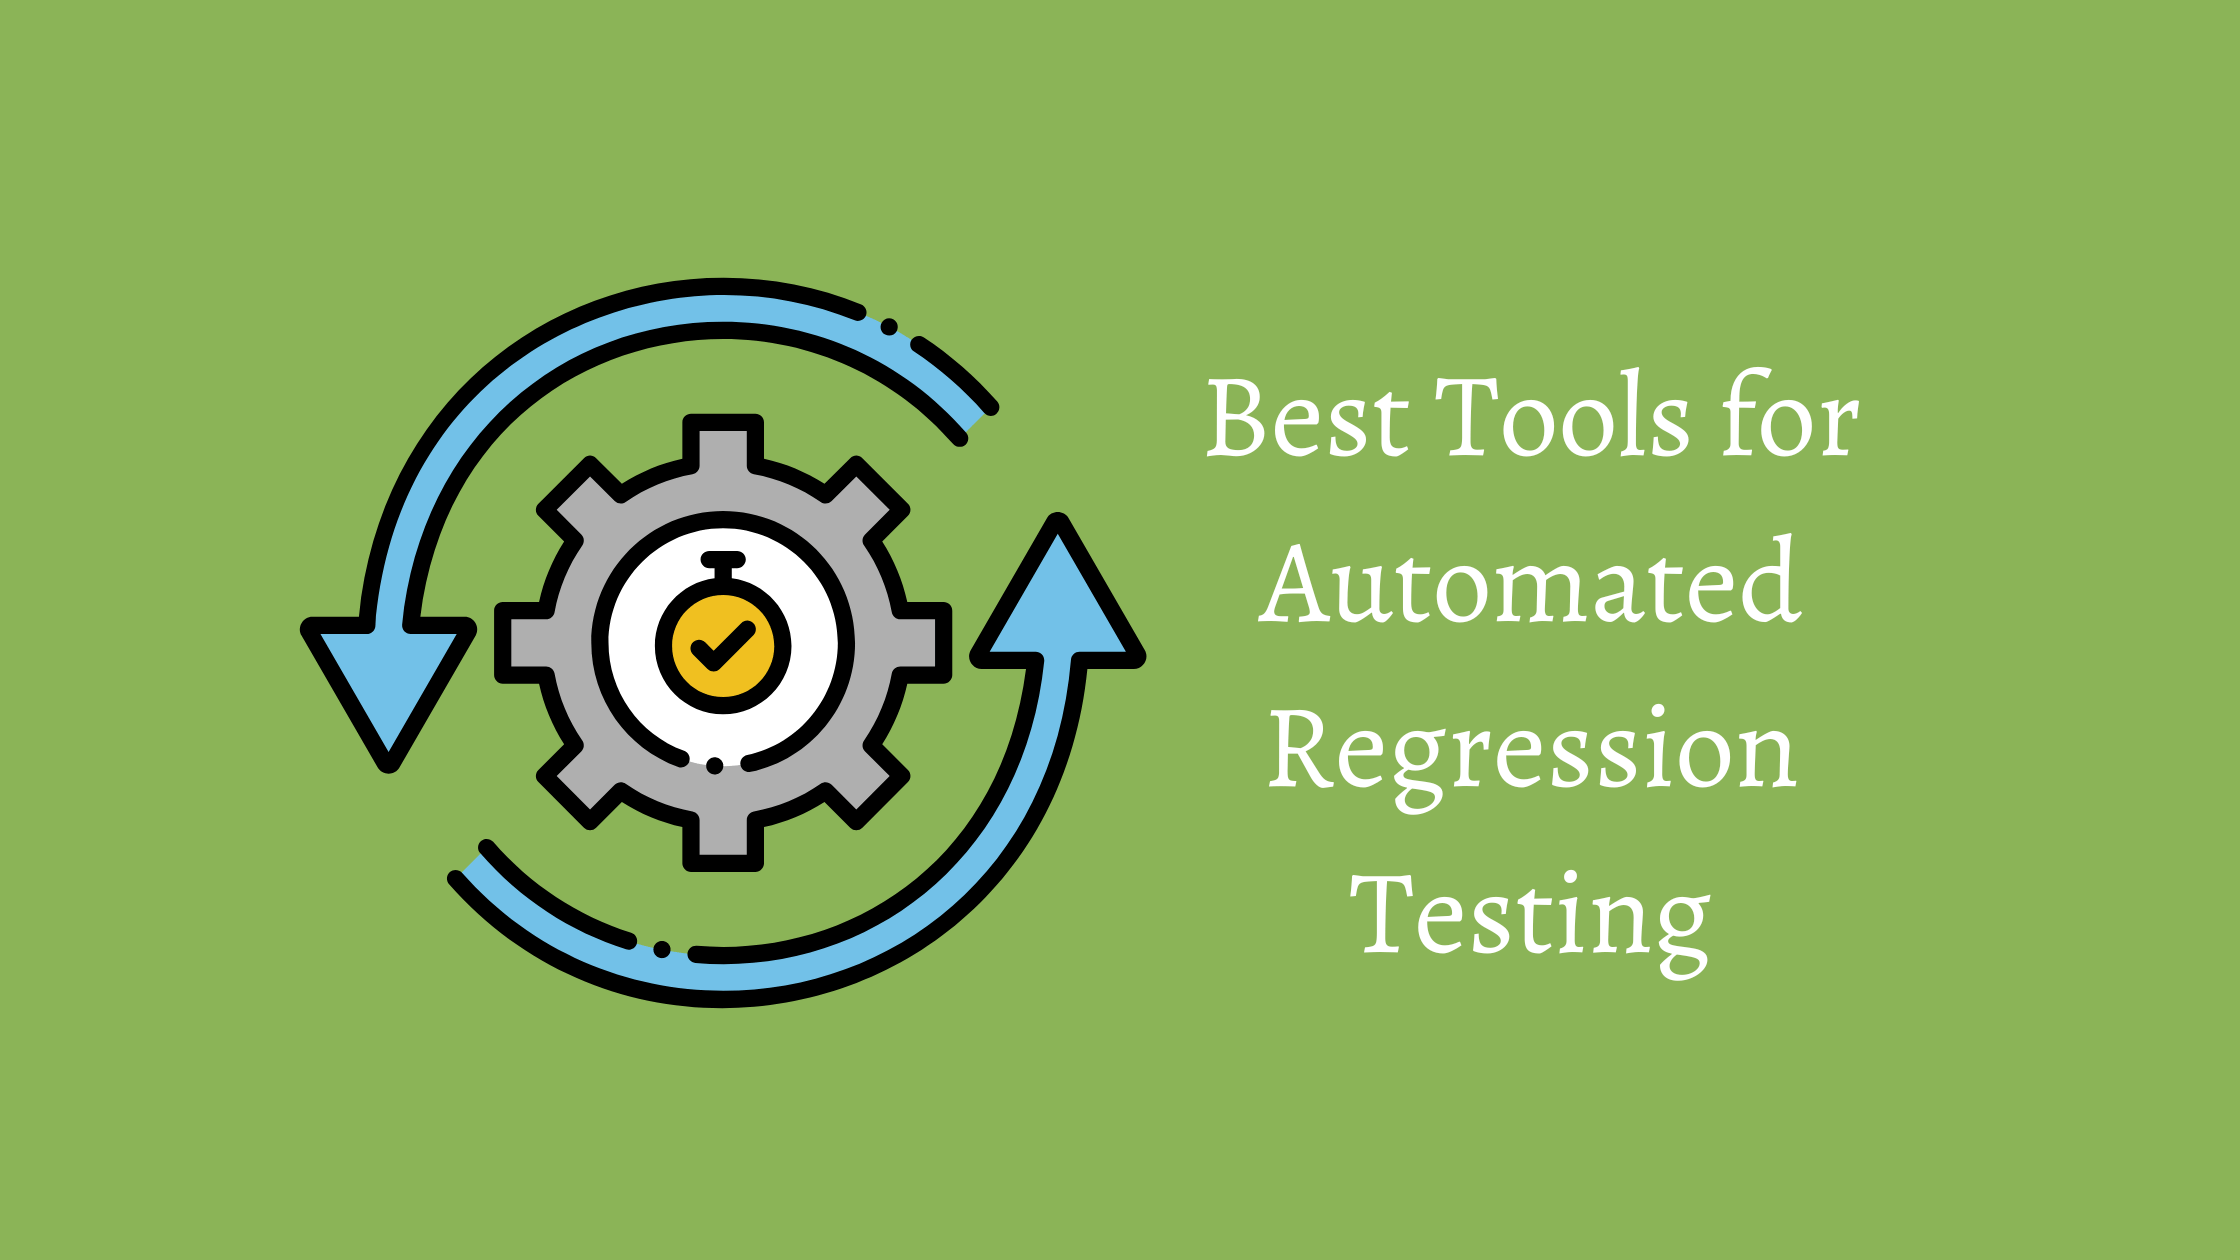 Tools for Automated Regression Testing